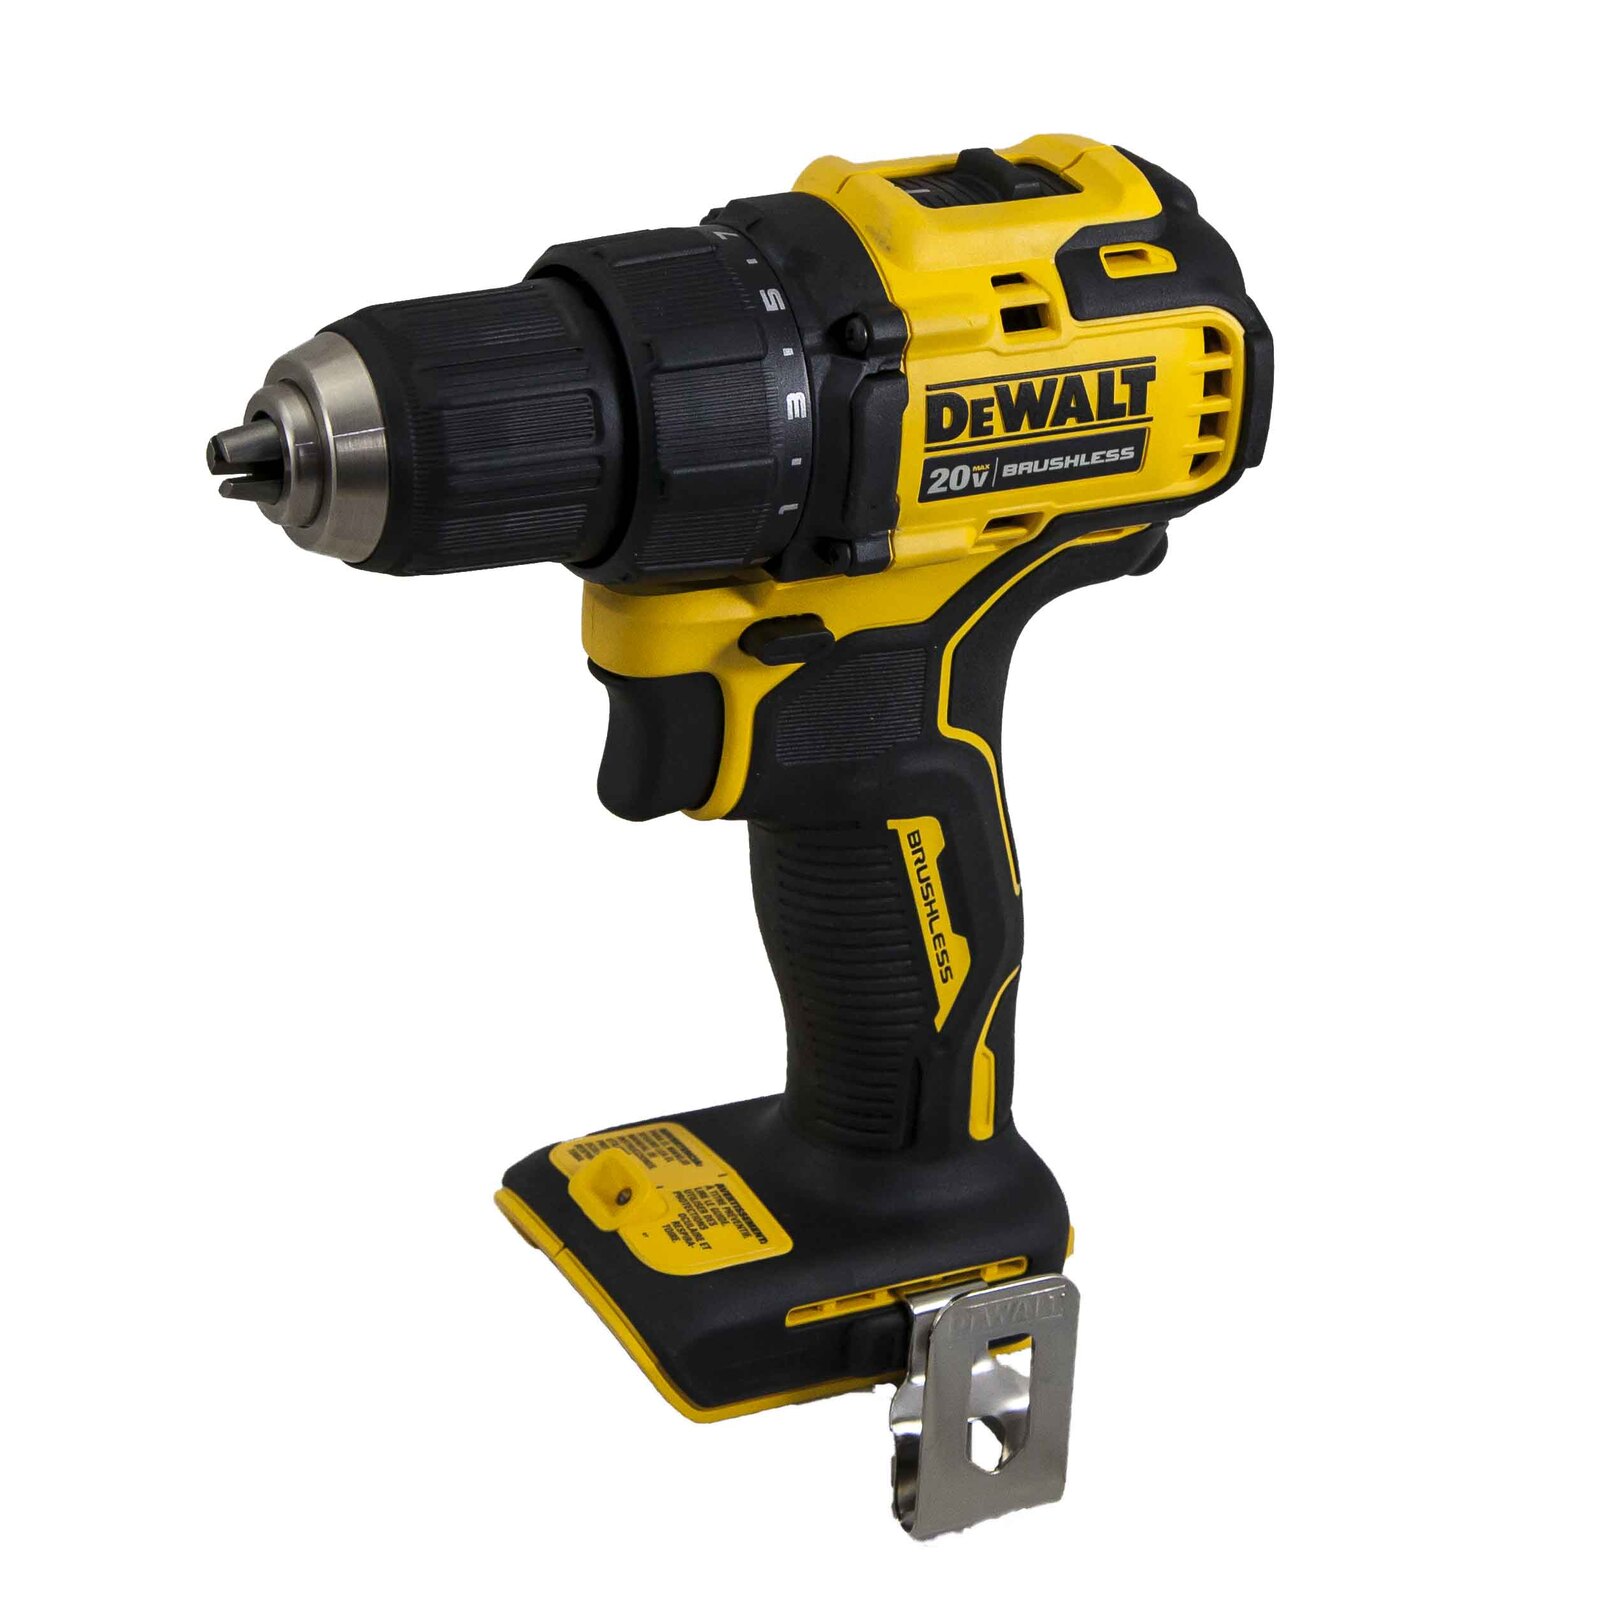 DEWALT 20V Max Compact Lithium Battery Brushless Electric Drill Driver ...